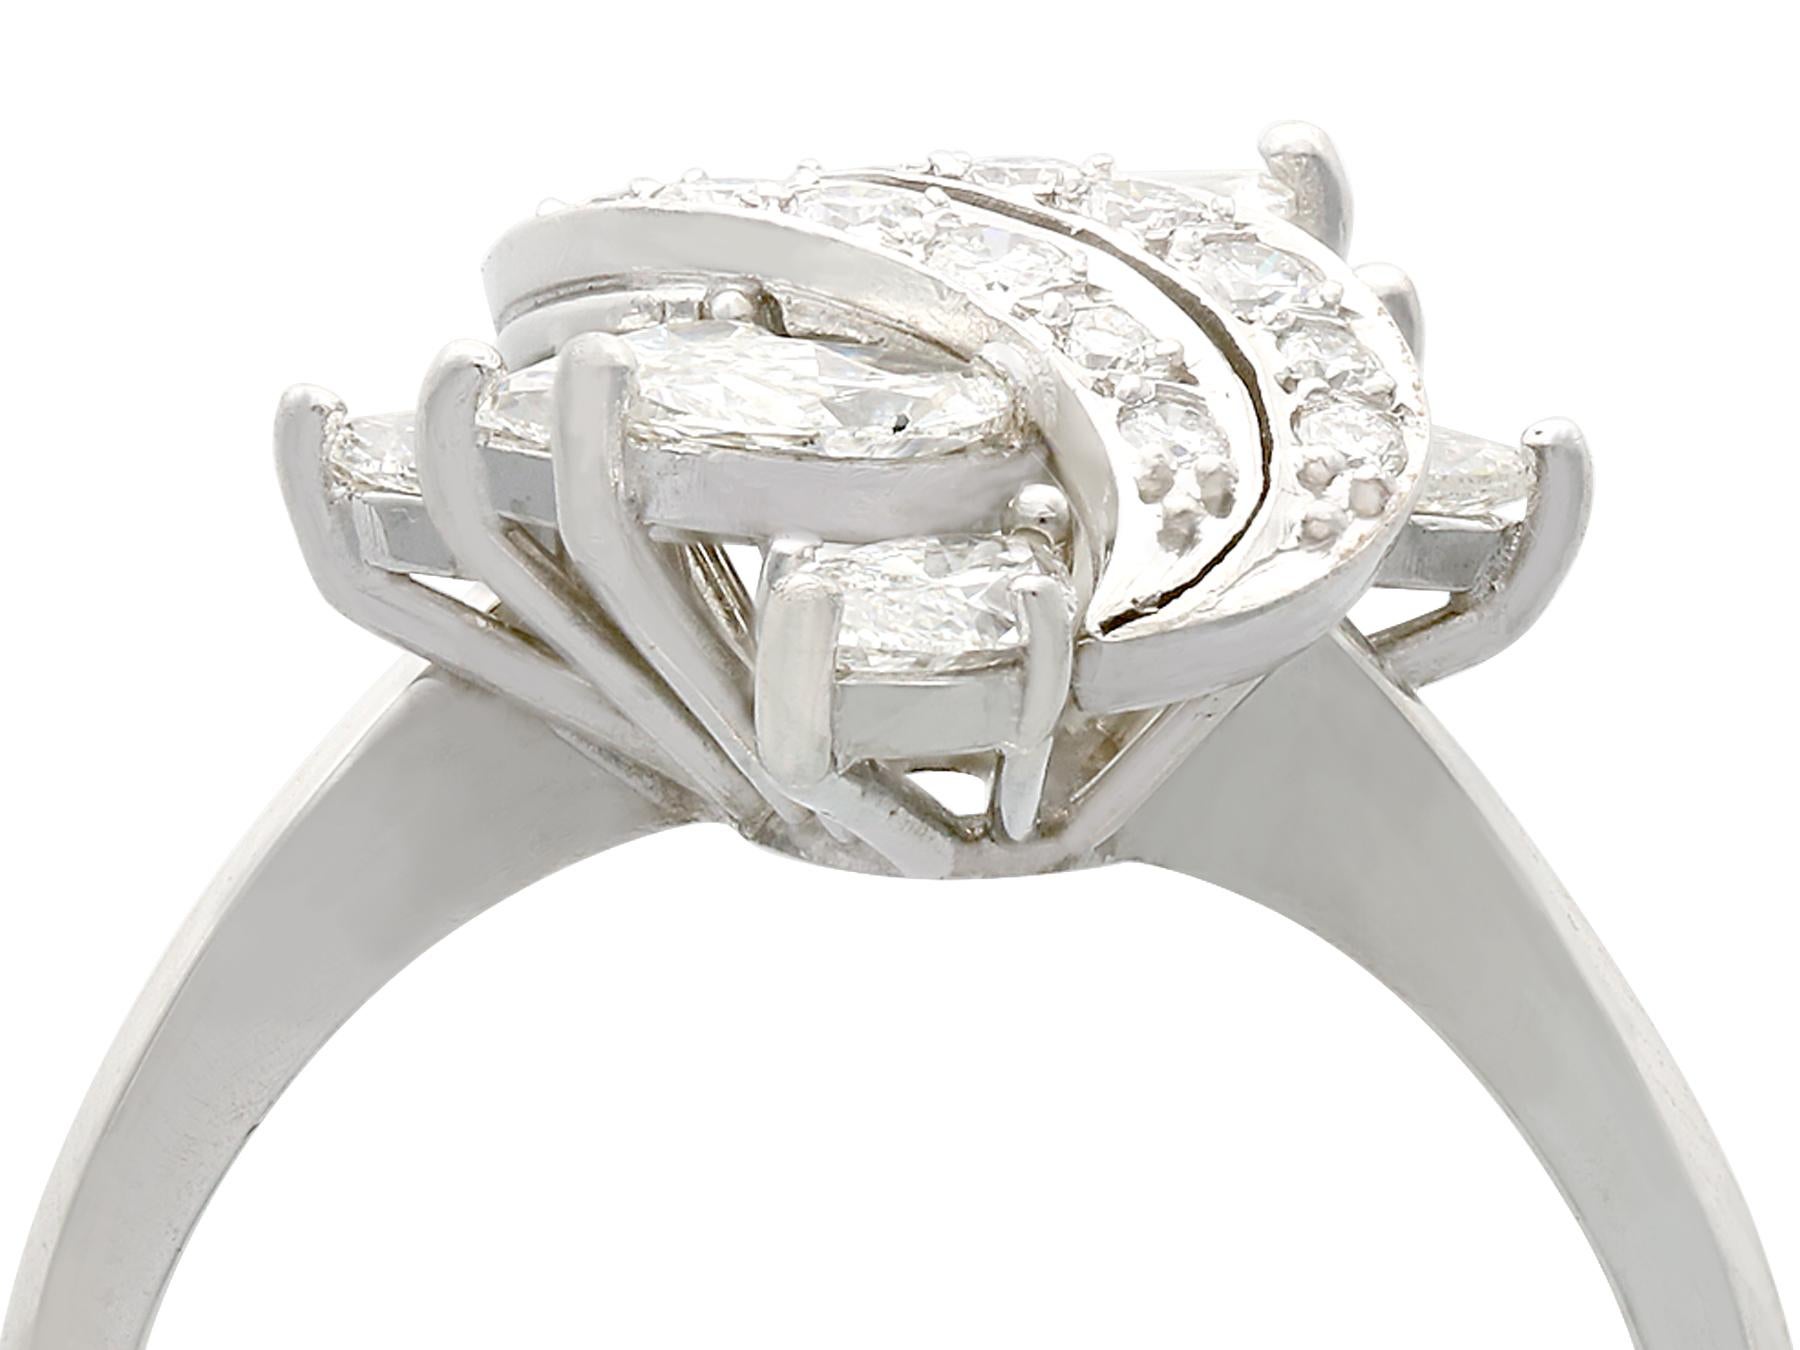 A stunning vintage 1950s 2.19 carat diamond and platinum twist style dress ring; part of our diverse diamond jewelry and estate jewelry collections.

This stunning, fine and impressive vintage ring has been crafted in platinum.

The pierced